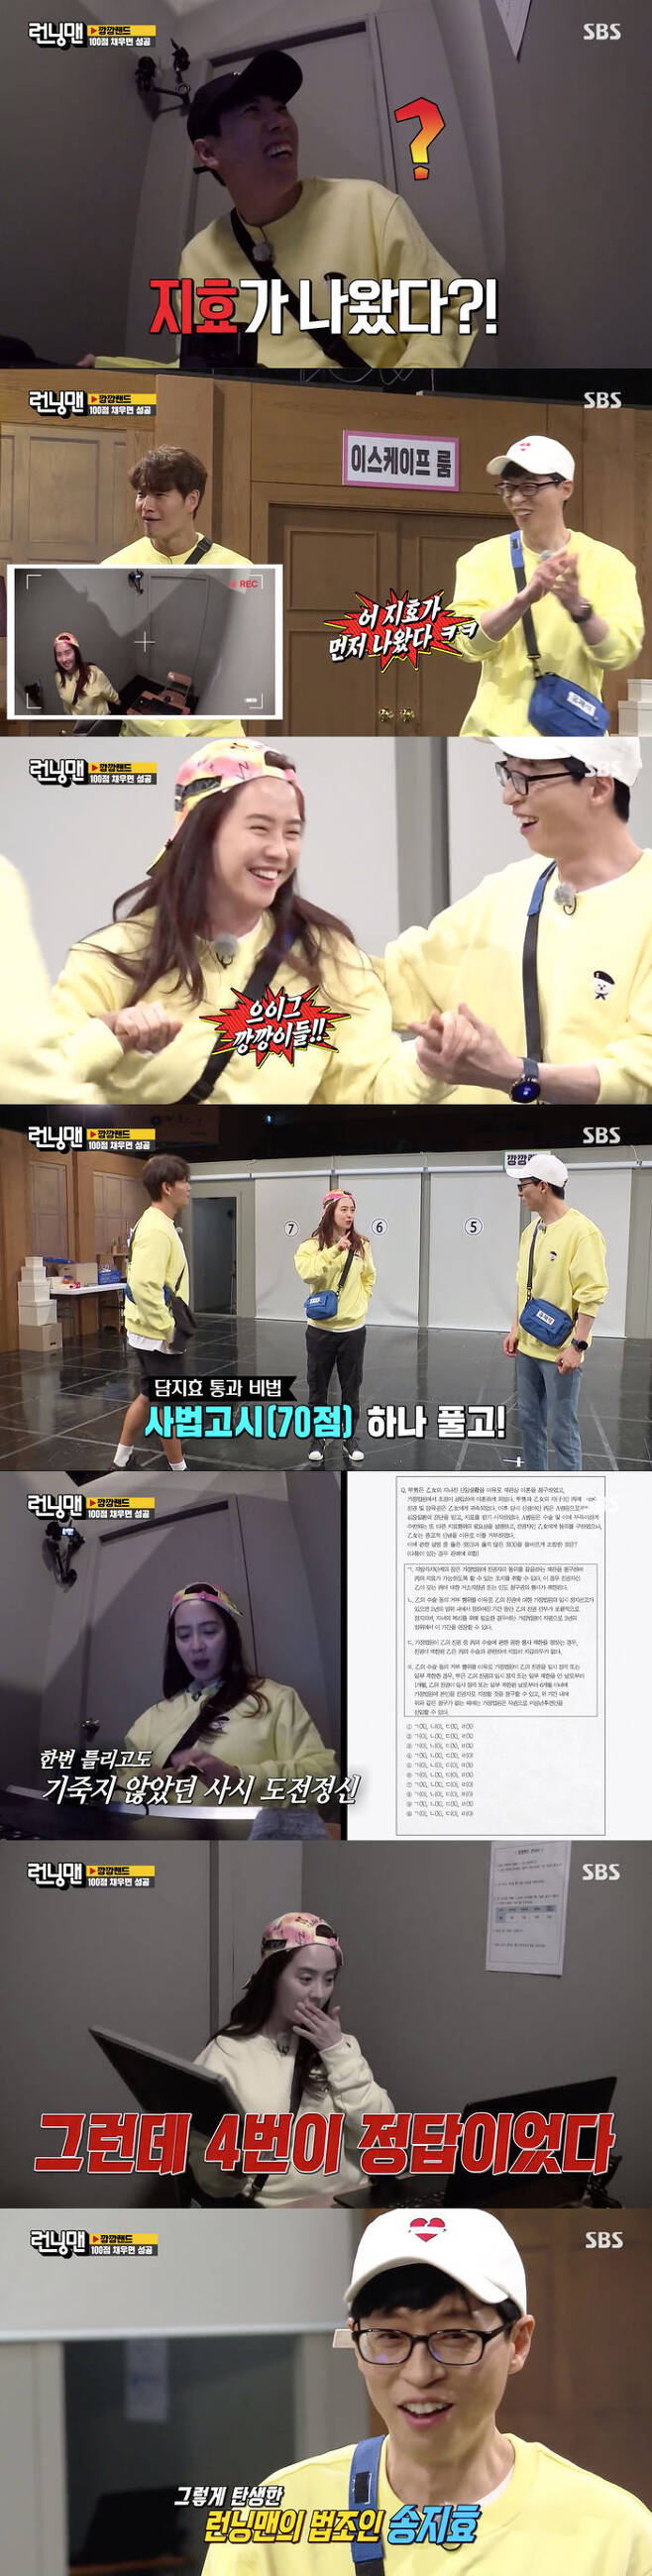 Song Ji-hyo finds new aptitude after 11 yearsOn SBS Running Man broadcasted on the 16th, the representative Korean gangsters who were below average common sense invited the members of the Running Man to the Kangkang Land.The first to pass the pre-test on the show was Baro Yoo Jae-Suk, followed by Kim Jong-kook, who managed to escape, which was the order everyone had expected.But everyone was surprised to see the third passer. The third escapee was Baro Song Ji-hyo.Yoo Jae-Suk was surprised that Ji Hyo came out first, and the other members denied the reality, saying, Do not play.Song Ji-hyo then laughed at the rest of the members who failed to escape, saying they were ugs.Song Ji-hyo then revealed the secret to his quick escape: I unraveled a 70-point judicial lawNotice, which surprised everyone.Song Ji-hyo did not hesitate to take a judicial lawNotice problem, which was the correct answer.Kim Jong-kook said, Hey man, you study now. Judicial lawNotice.It is really great, he said, cheering his brother who found a new aptitude in 11 years and laughing.